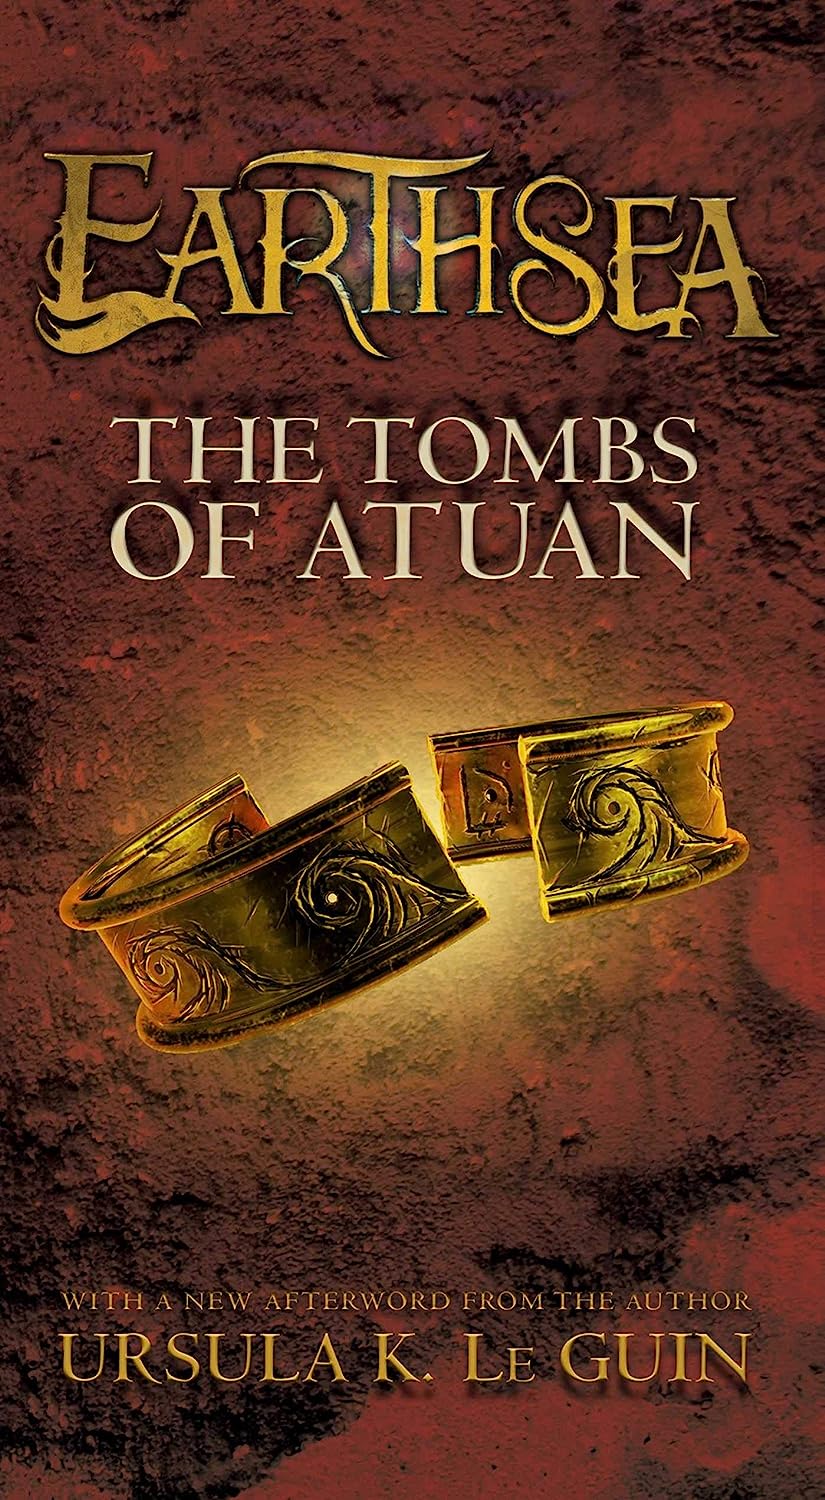 Newbery 수상작 The Tombs of Atuan (The Earthsea Cycle Series Book 2)